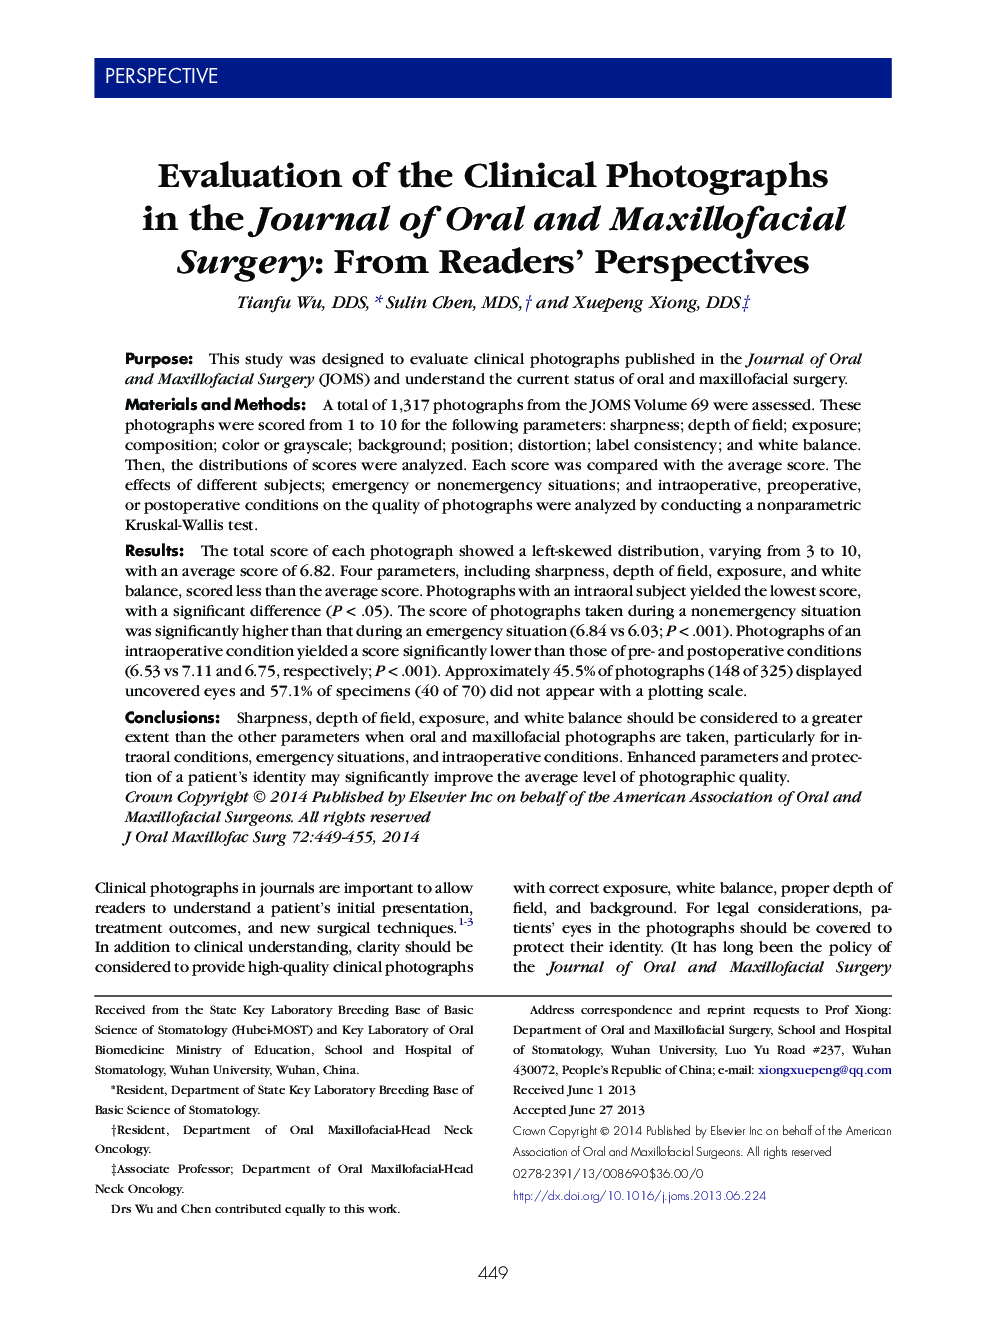 Evaluation of the Clinical Photographs in the Journal of Oral and Maxillofacial Surgery: From Readers' Perspectives 